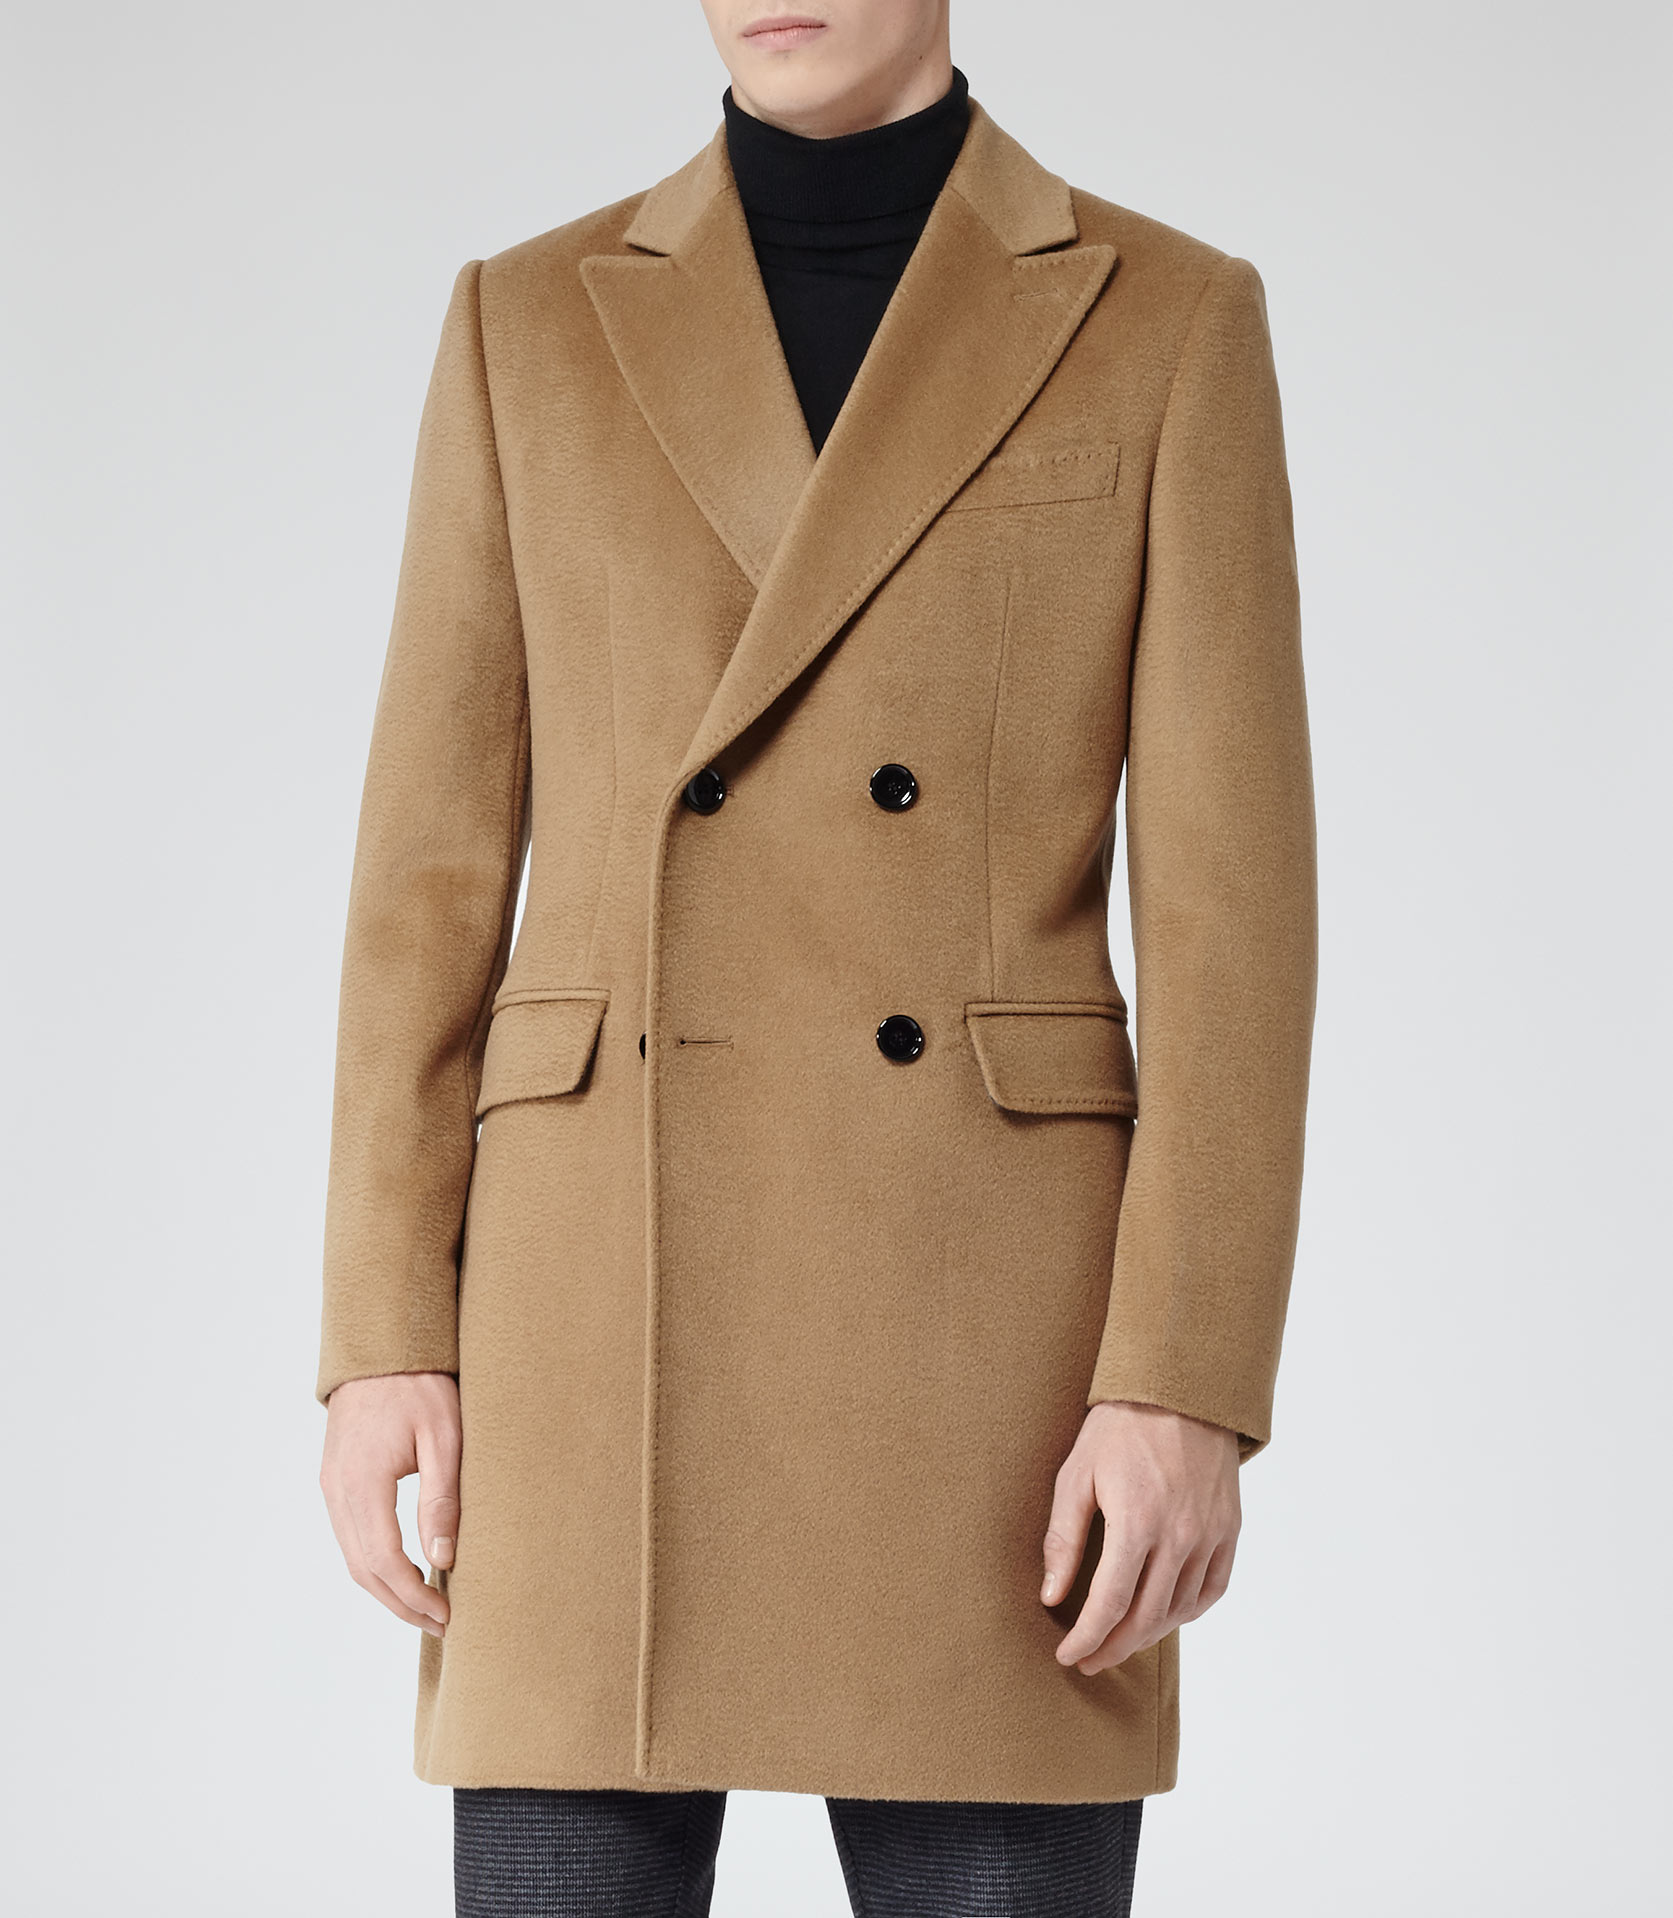 Lyst - Reiss Kanye Double Breasted Coat Lapel in Brown for Men